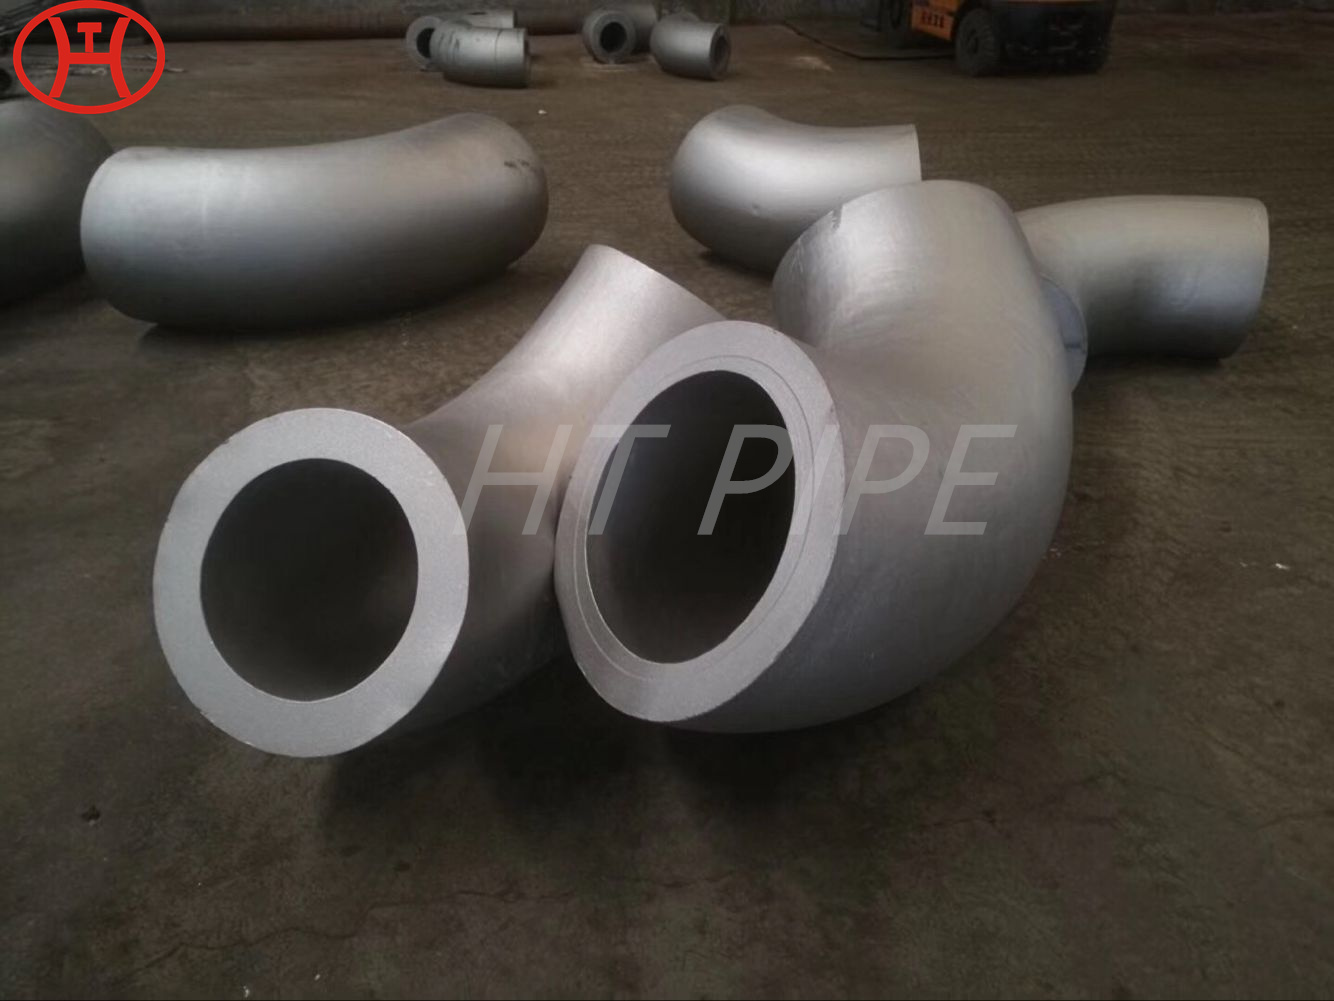 1-4 inch butt welded stainless steel pipe fittings 45 degree equal 2205 duplex elbow